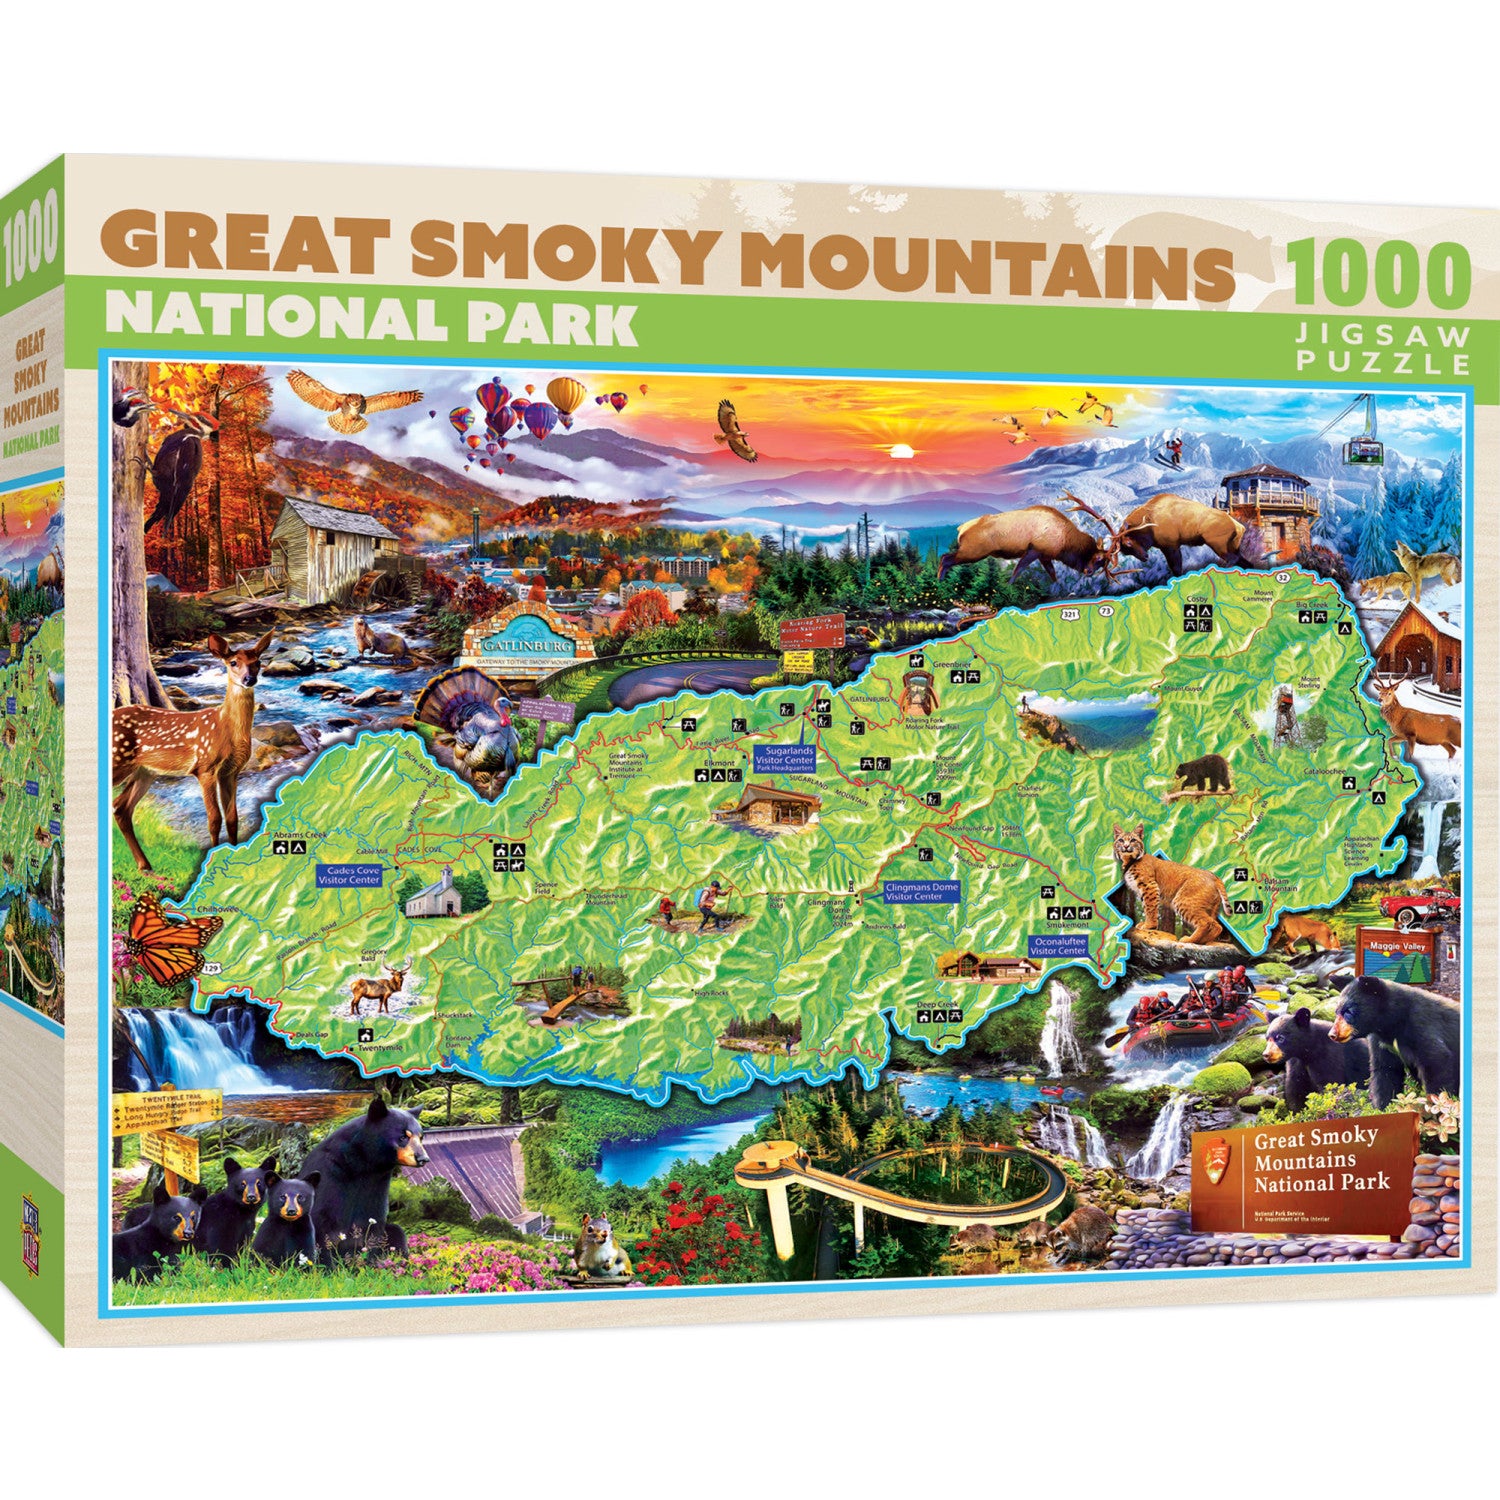 Great Smoky Mountains National Park 1000 Piece Jigsaw Puzzle